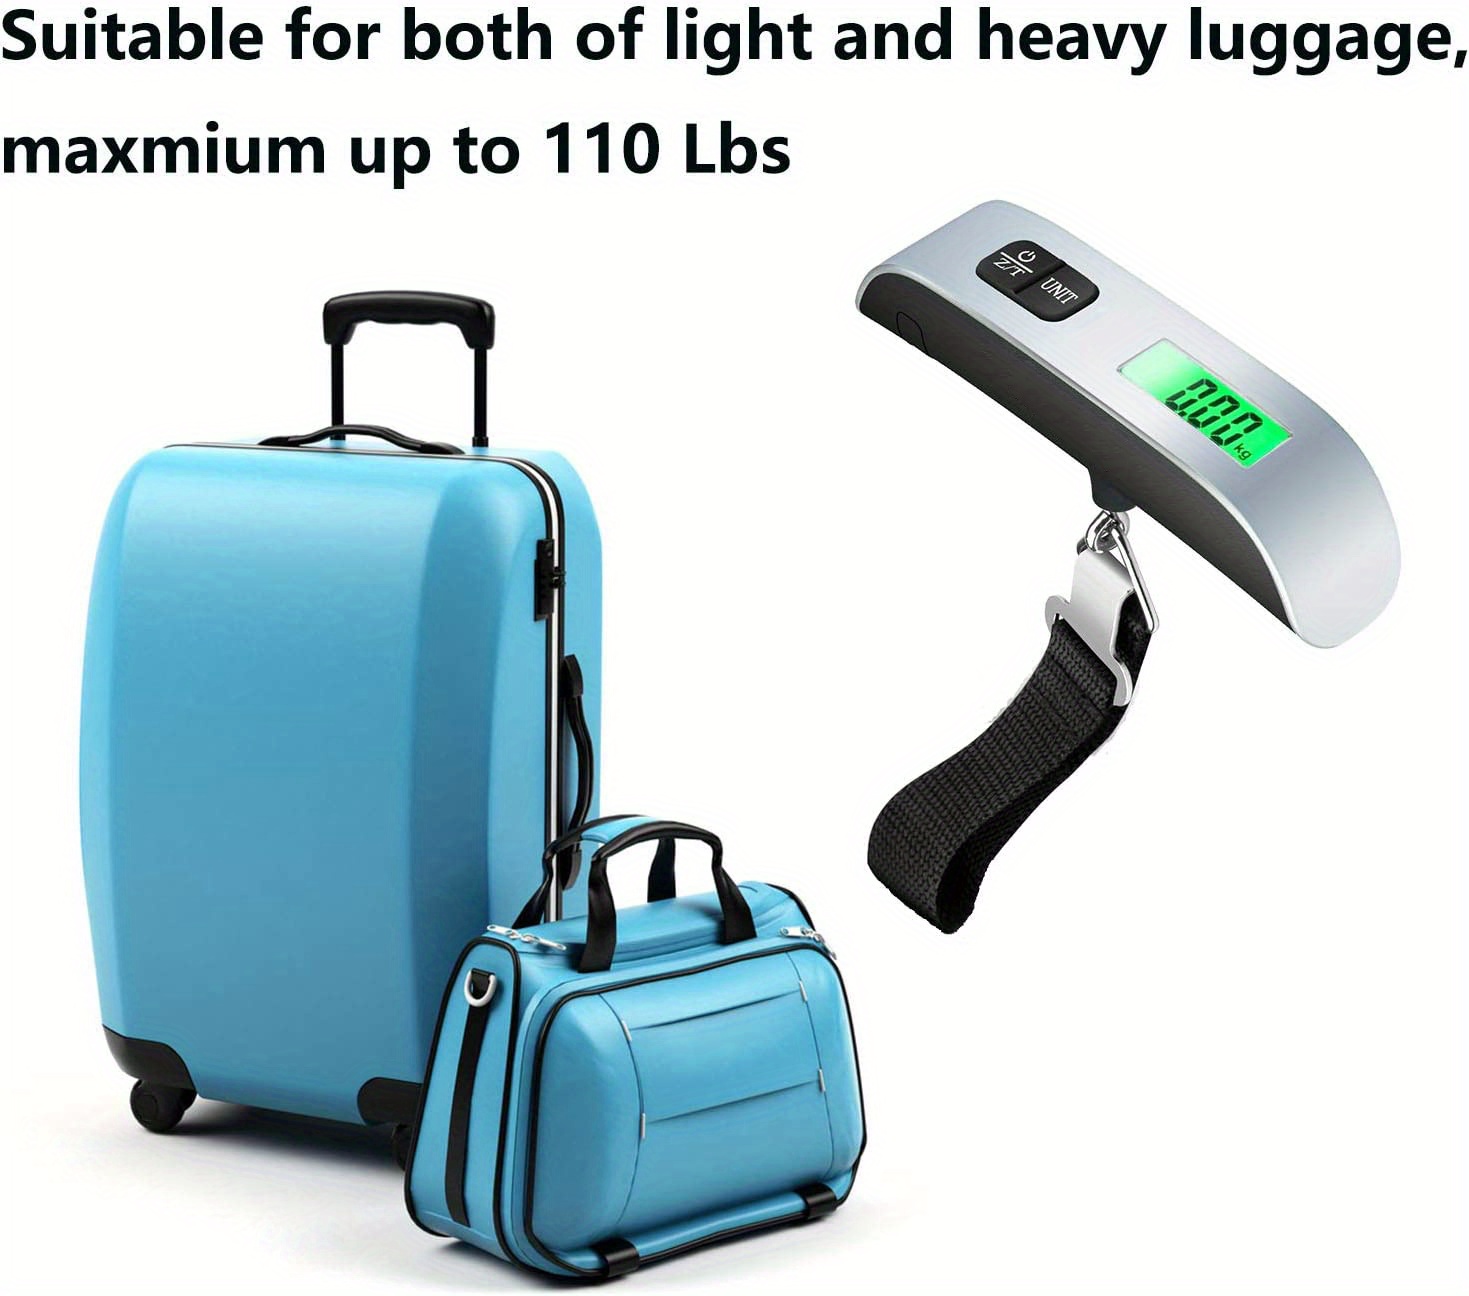 2-Handed Luggage Scale